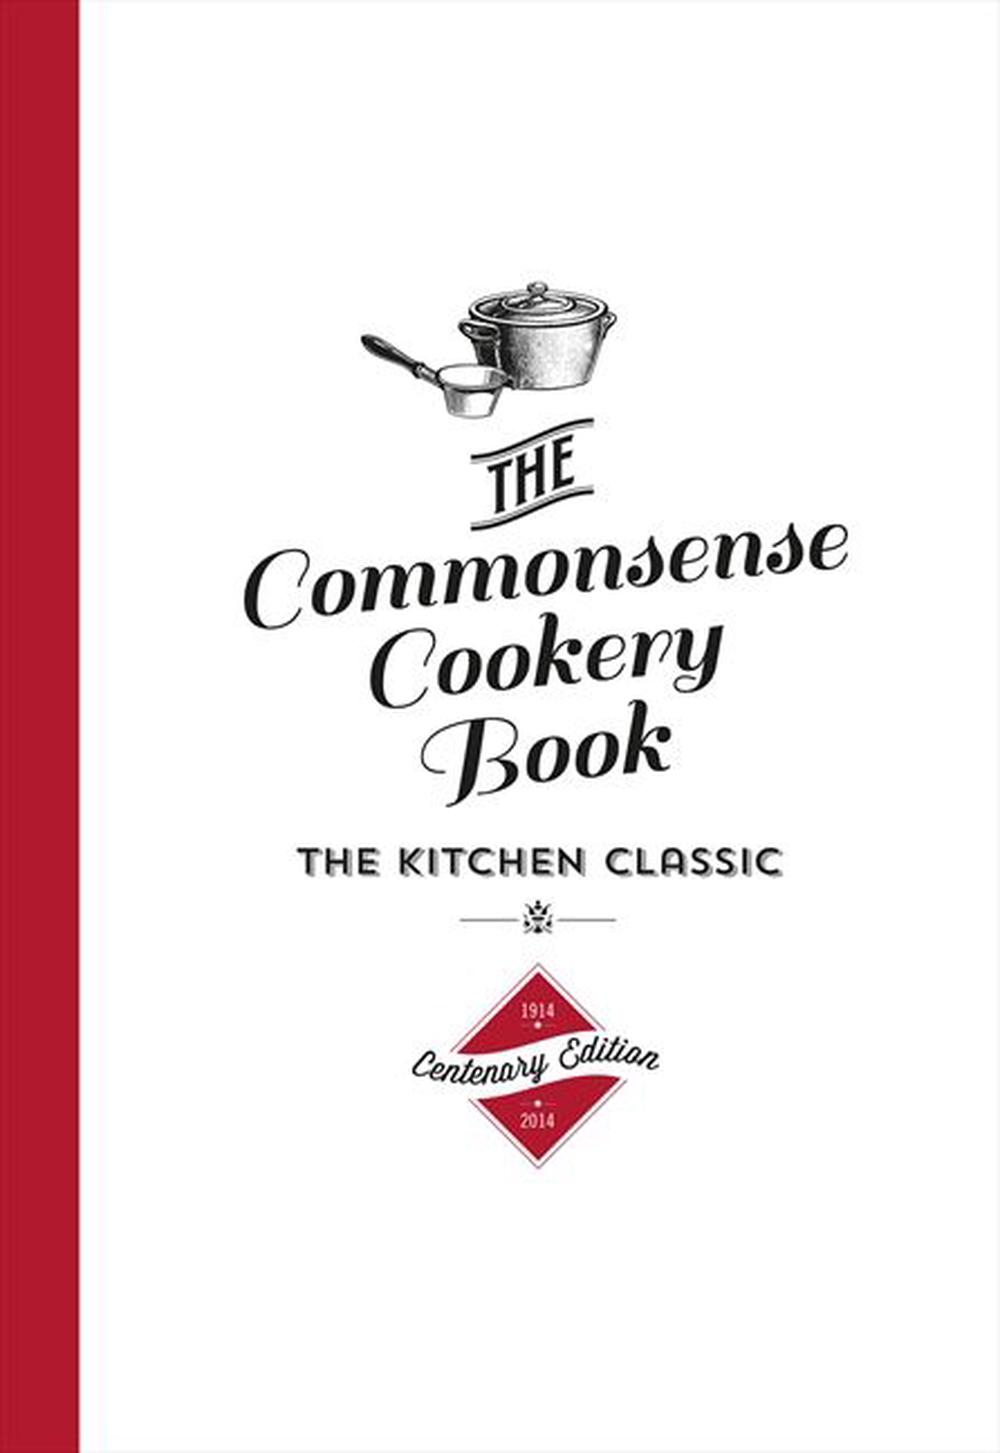 research title about home economics cookery